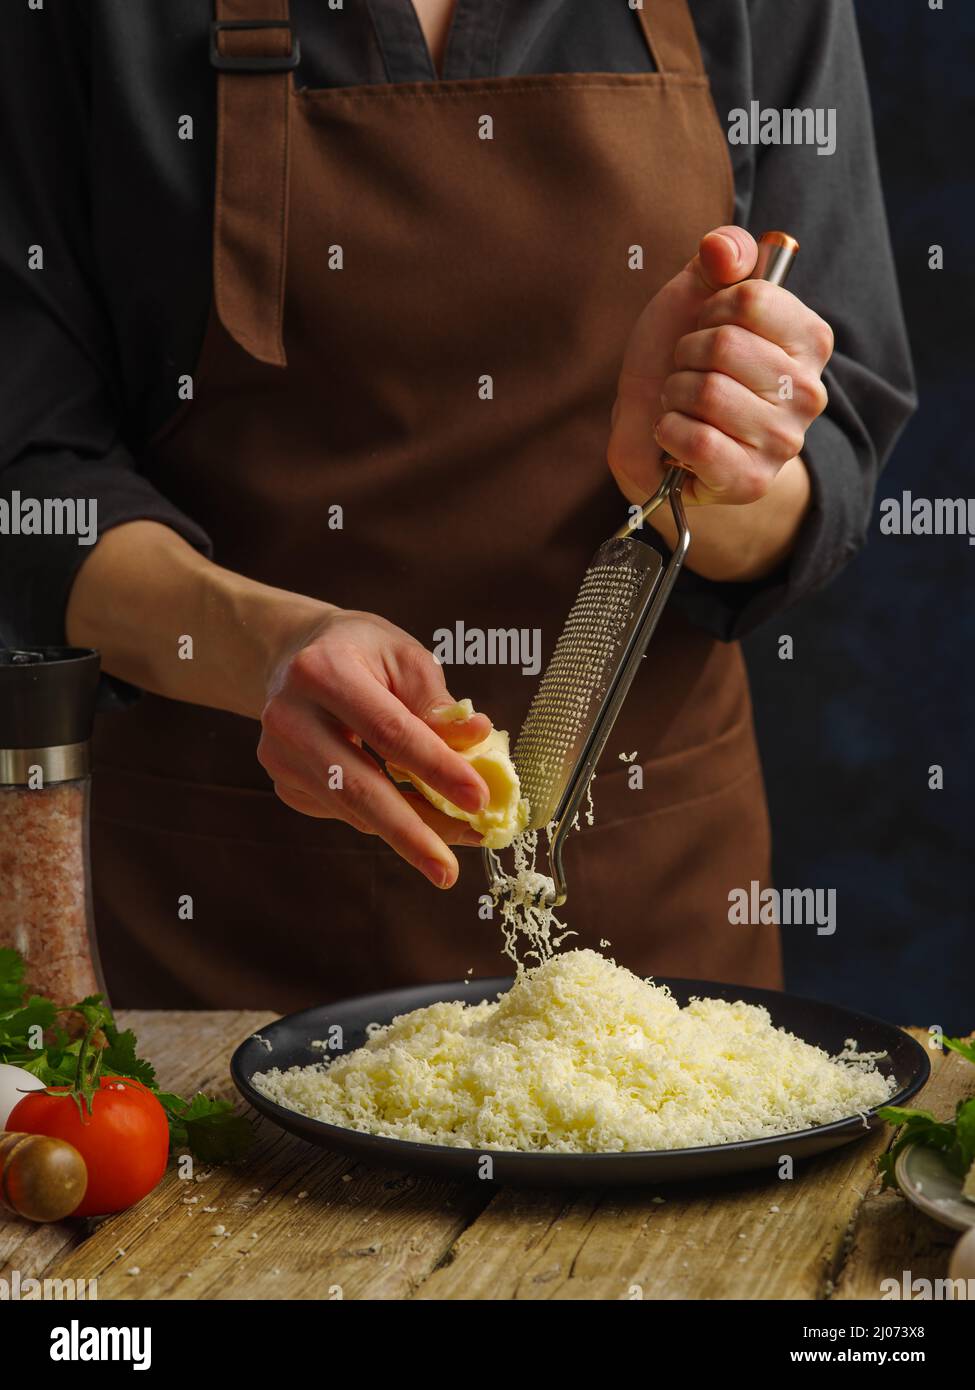 https://c8.alamy.com/comp/2J073X8/chef-rubs-cheese-mozzarella-for-preparation-of-salad-pizza-freezing-in-motionconcept-of-cooking-and-recipe-booksculinary-background-2J073X8.jpg